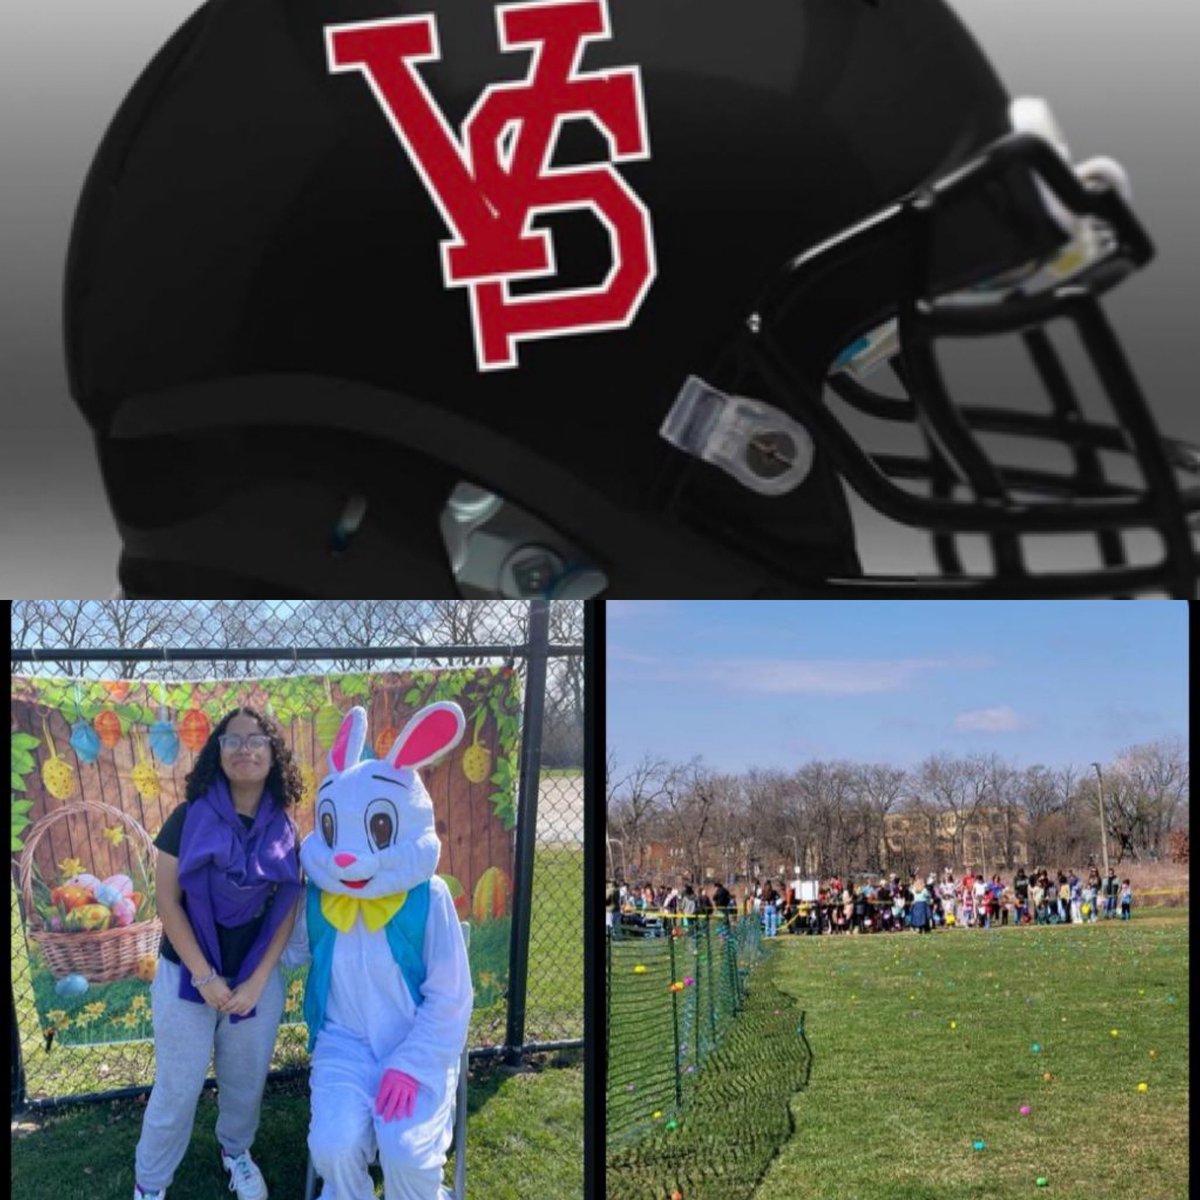 Our Softball and Football Panthers working together to show love for the community by volunteering for the Easter Egg event at Eugene Field Park. Great time was had by all! Happy Easter! 🐰 @von_athletics @VonSteubenMSC @VonAdmissions @VonCollege @CPLAthletics @CPLFCA